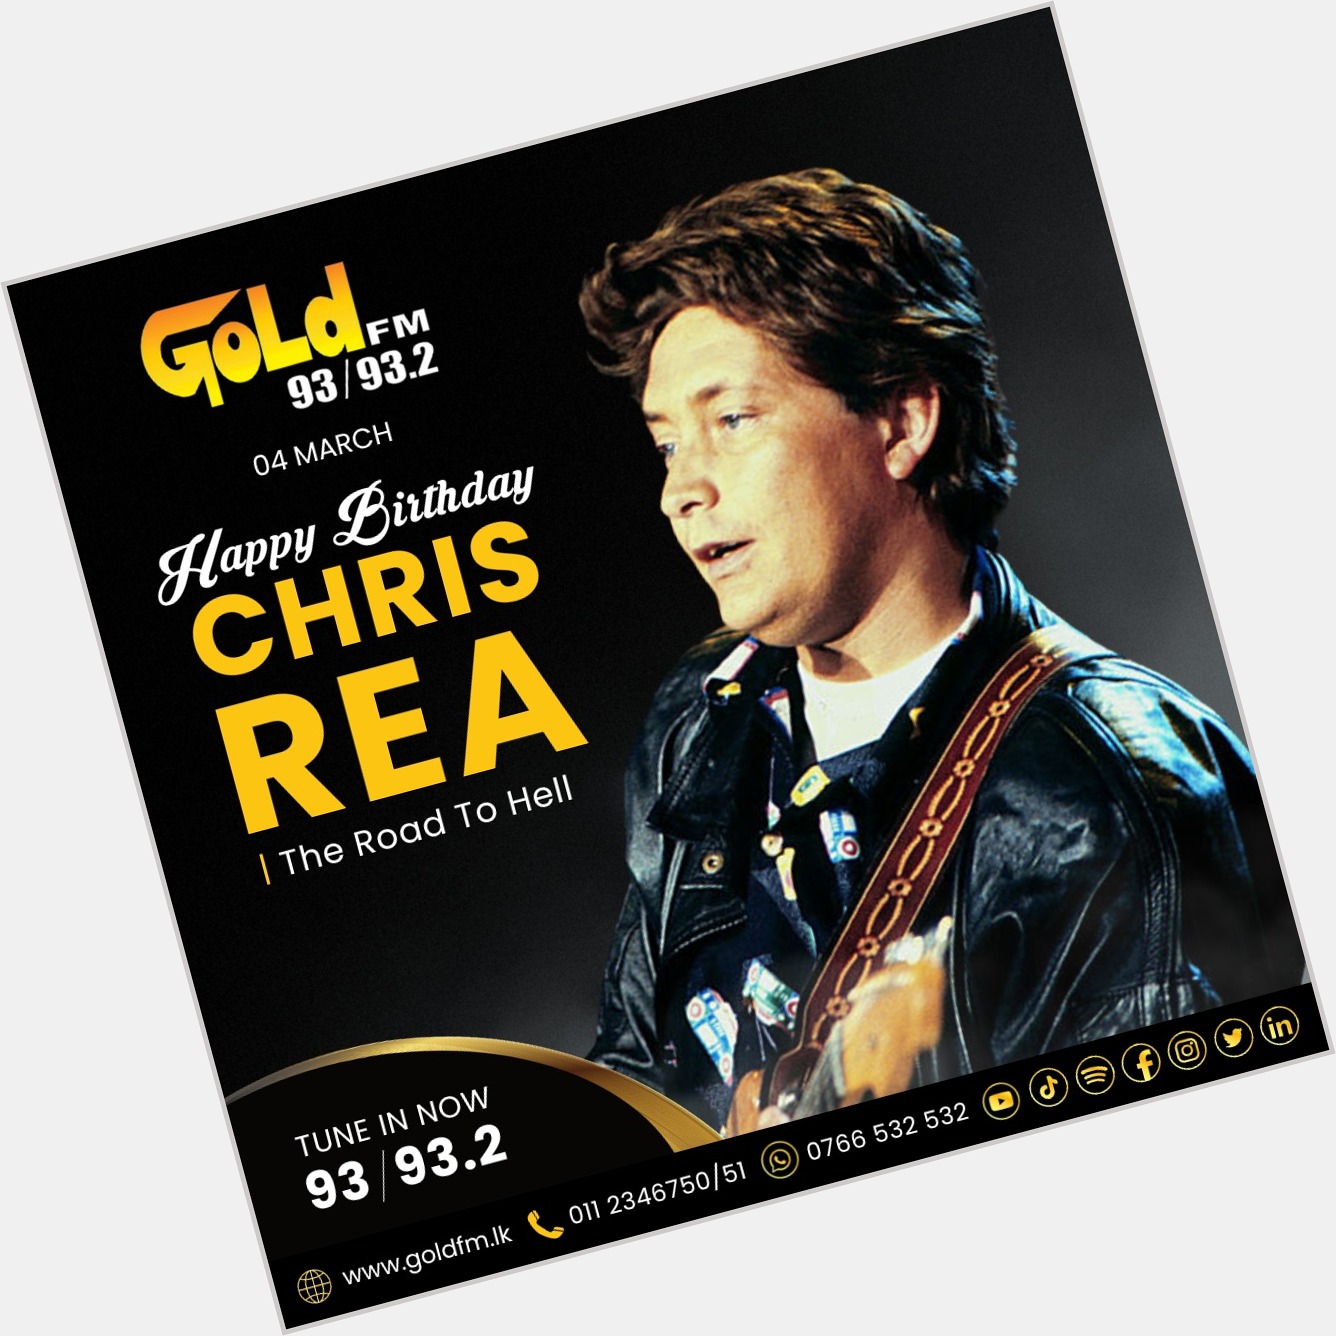 HAPPY BIRTHDAY TO CHRIS REA TUNE IN NOW 93 / 93.2 Island wide      